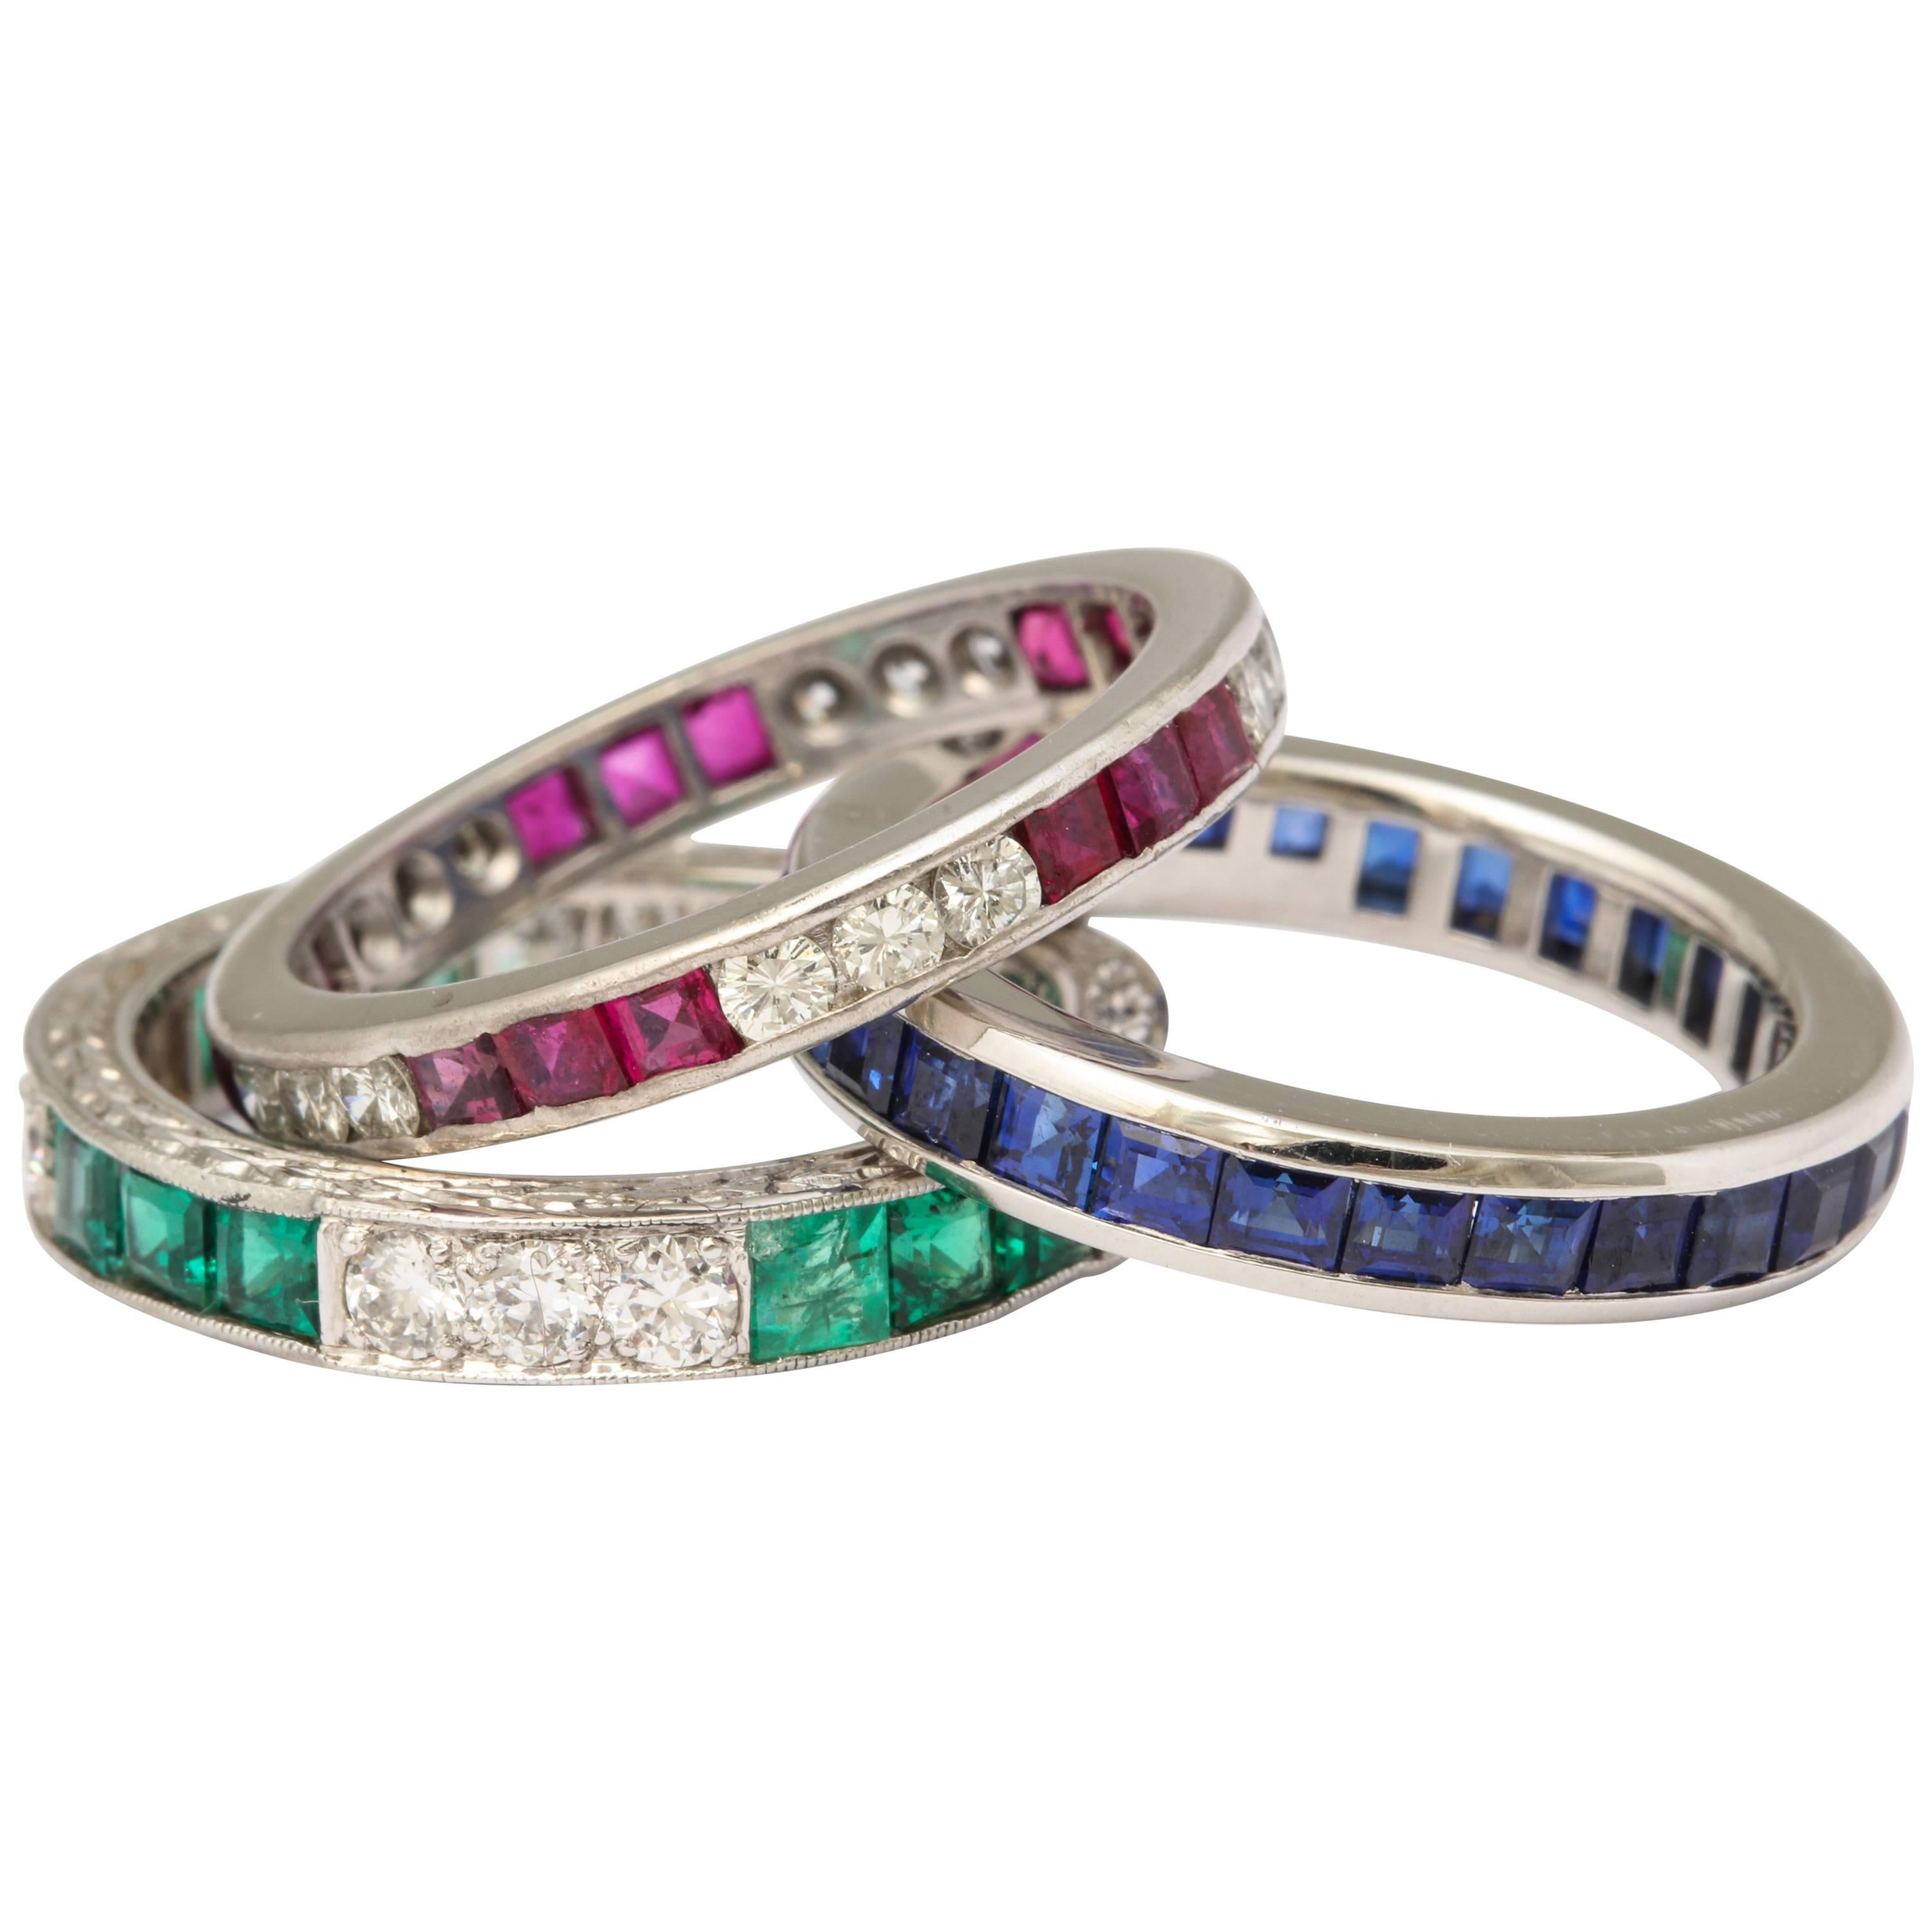 Wedding Bands of Diamonds, Sapphires, Rubies and Emeralds Set in Platinum